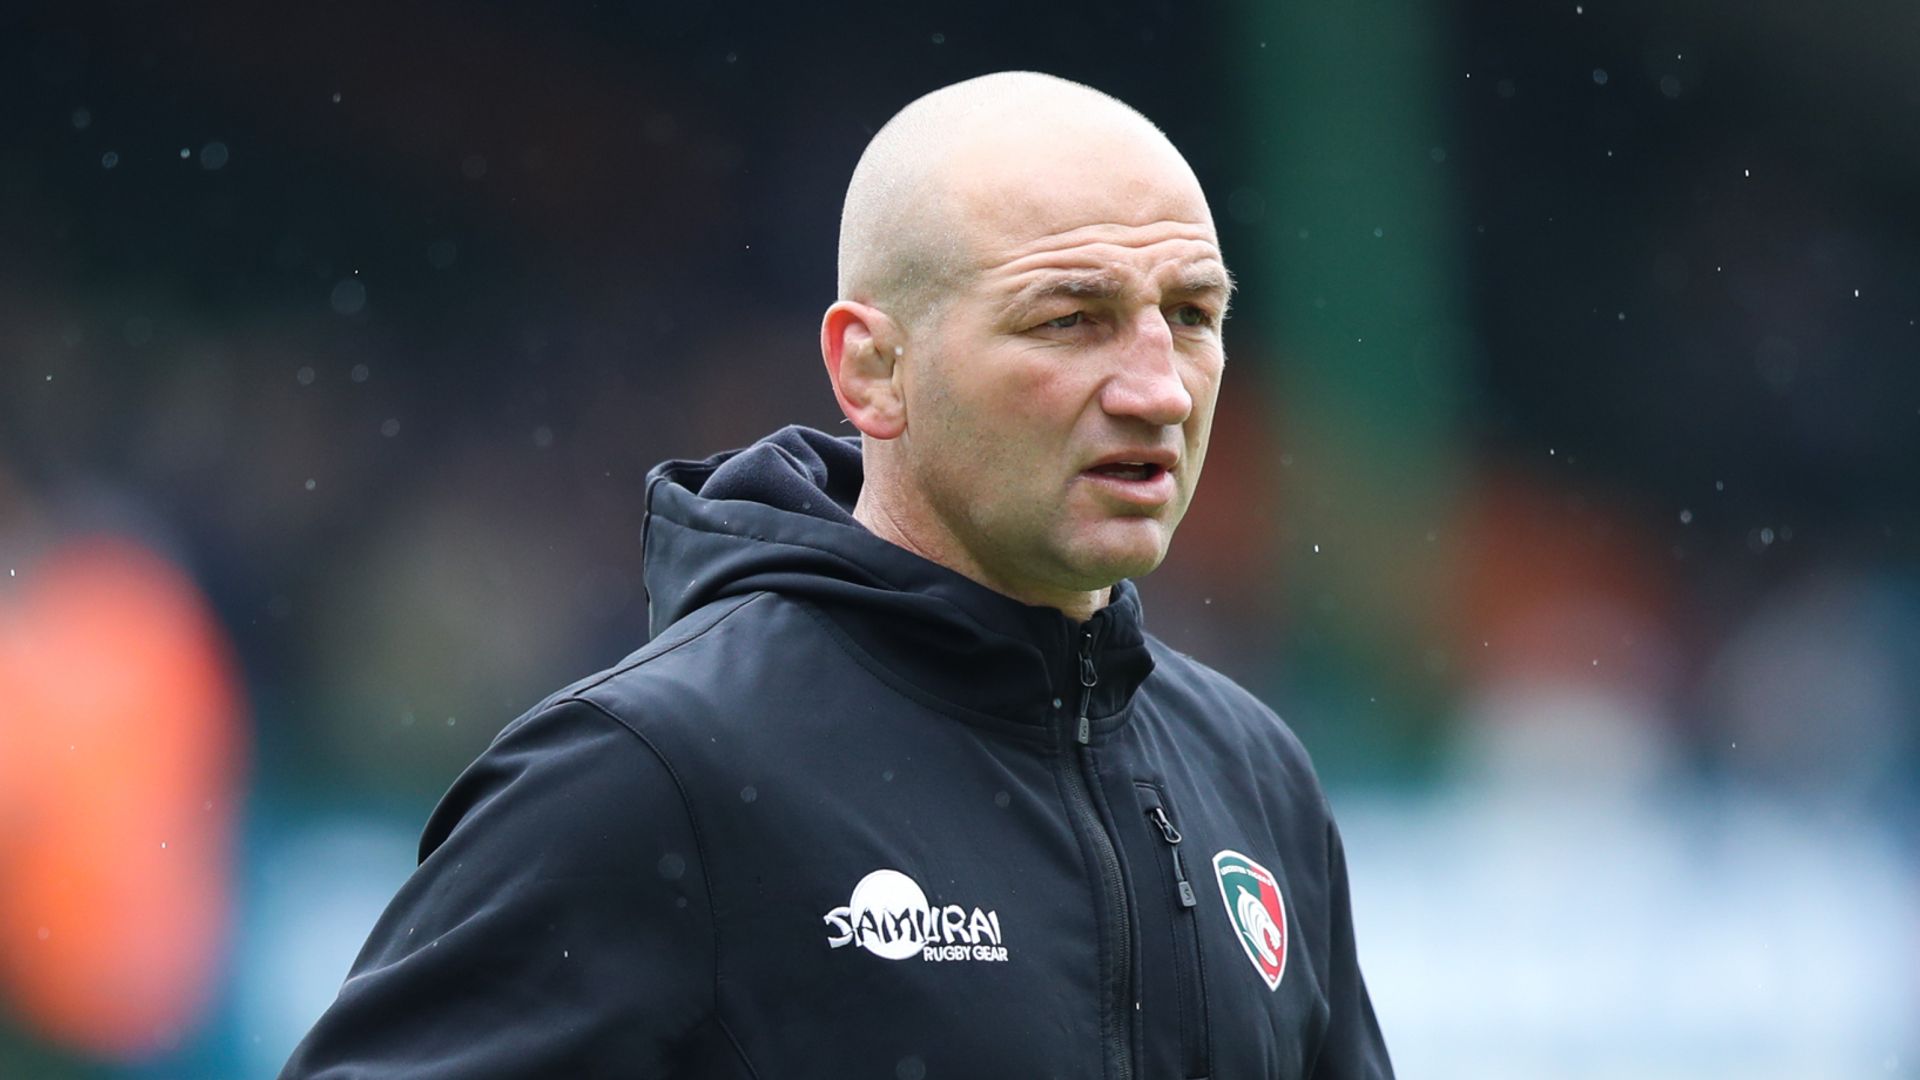 RFU in negotiations with Leicester over Borthwick compensation